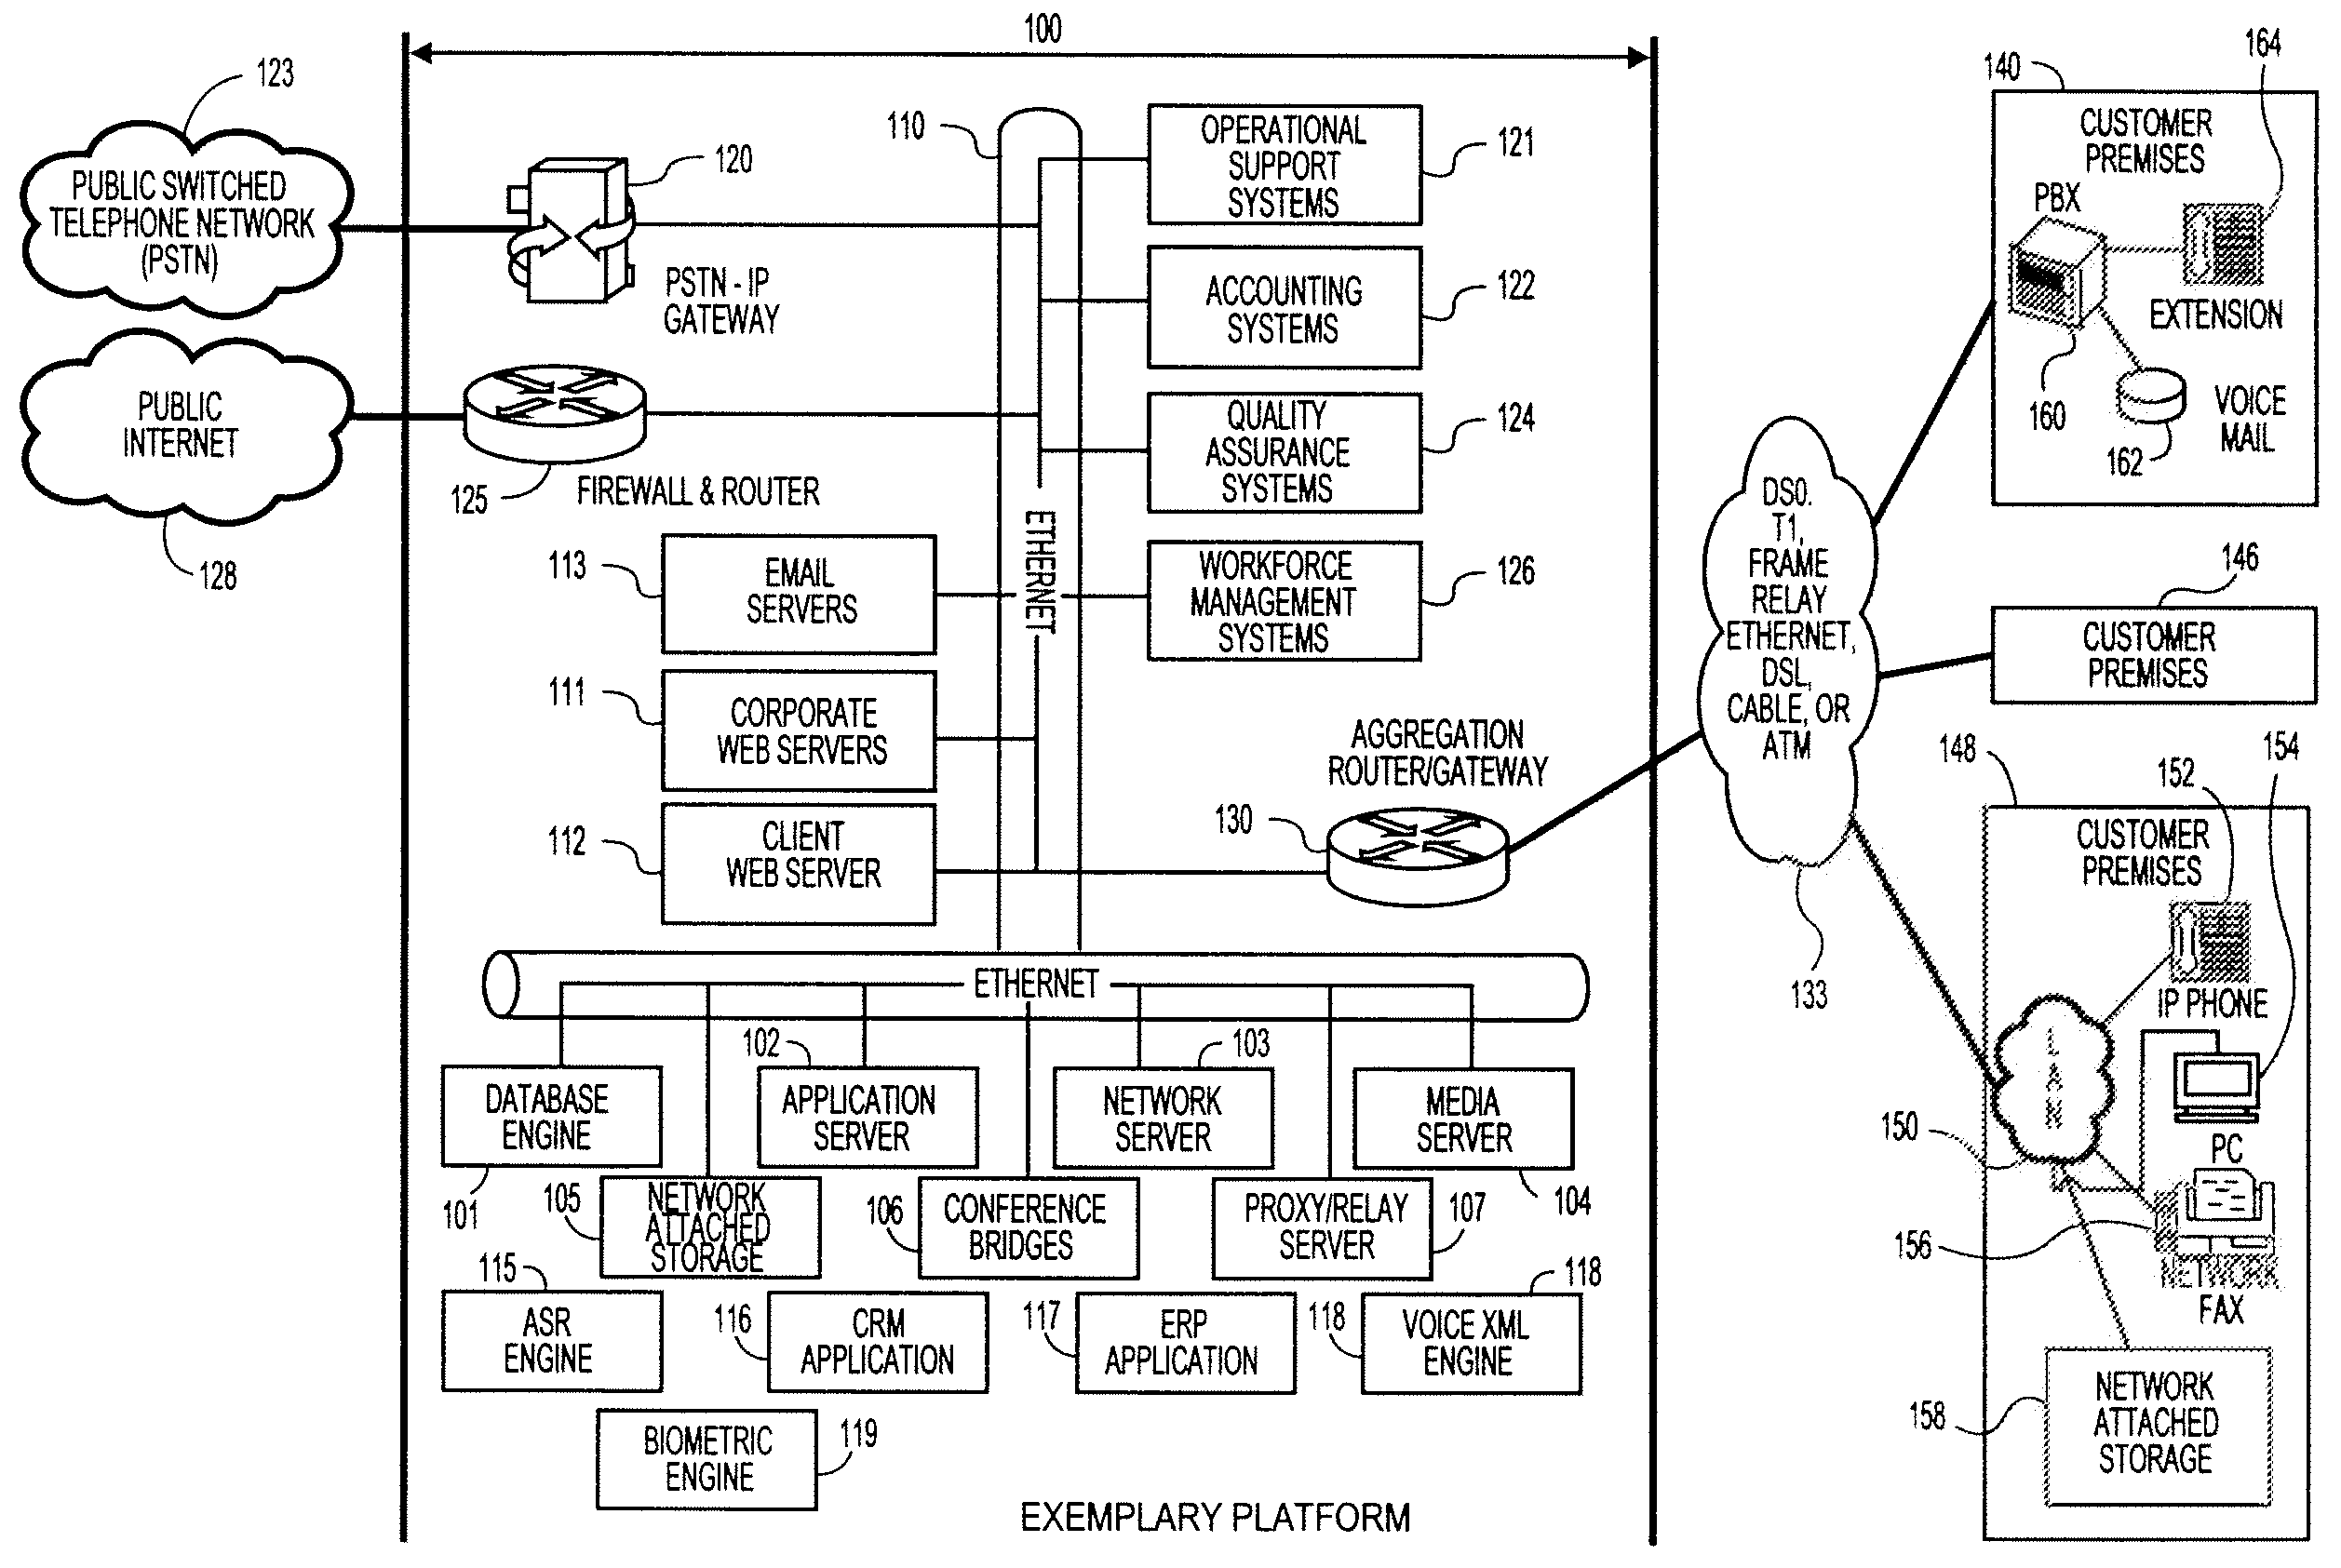 System and method for the secure, real-time, high accuracy conversion of general quality speech into text